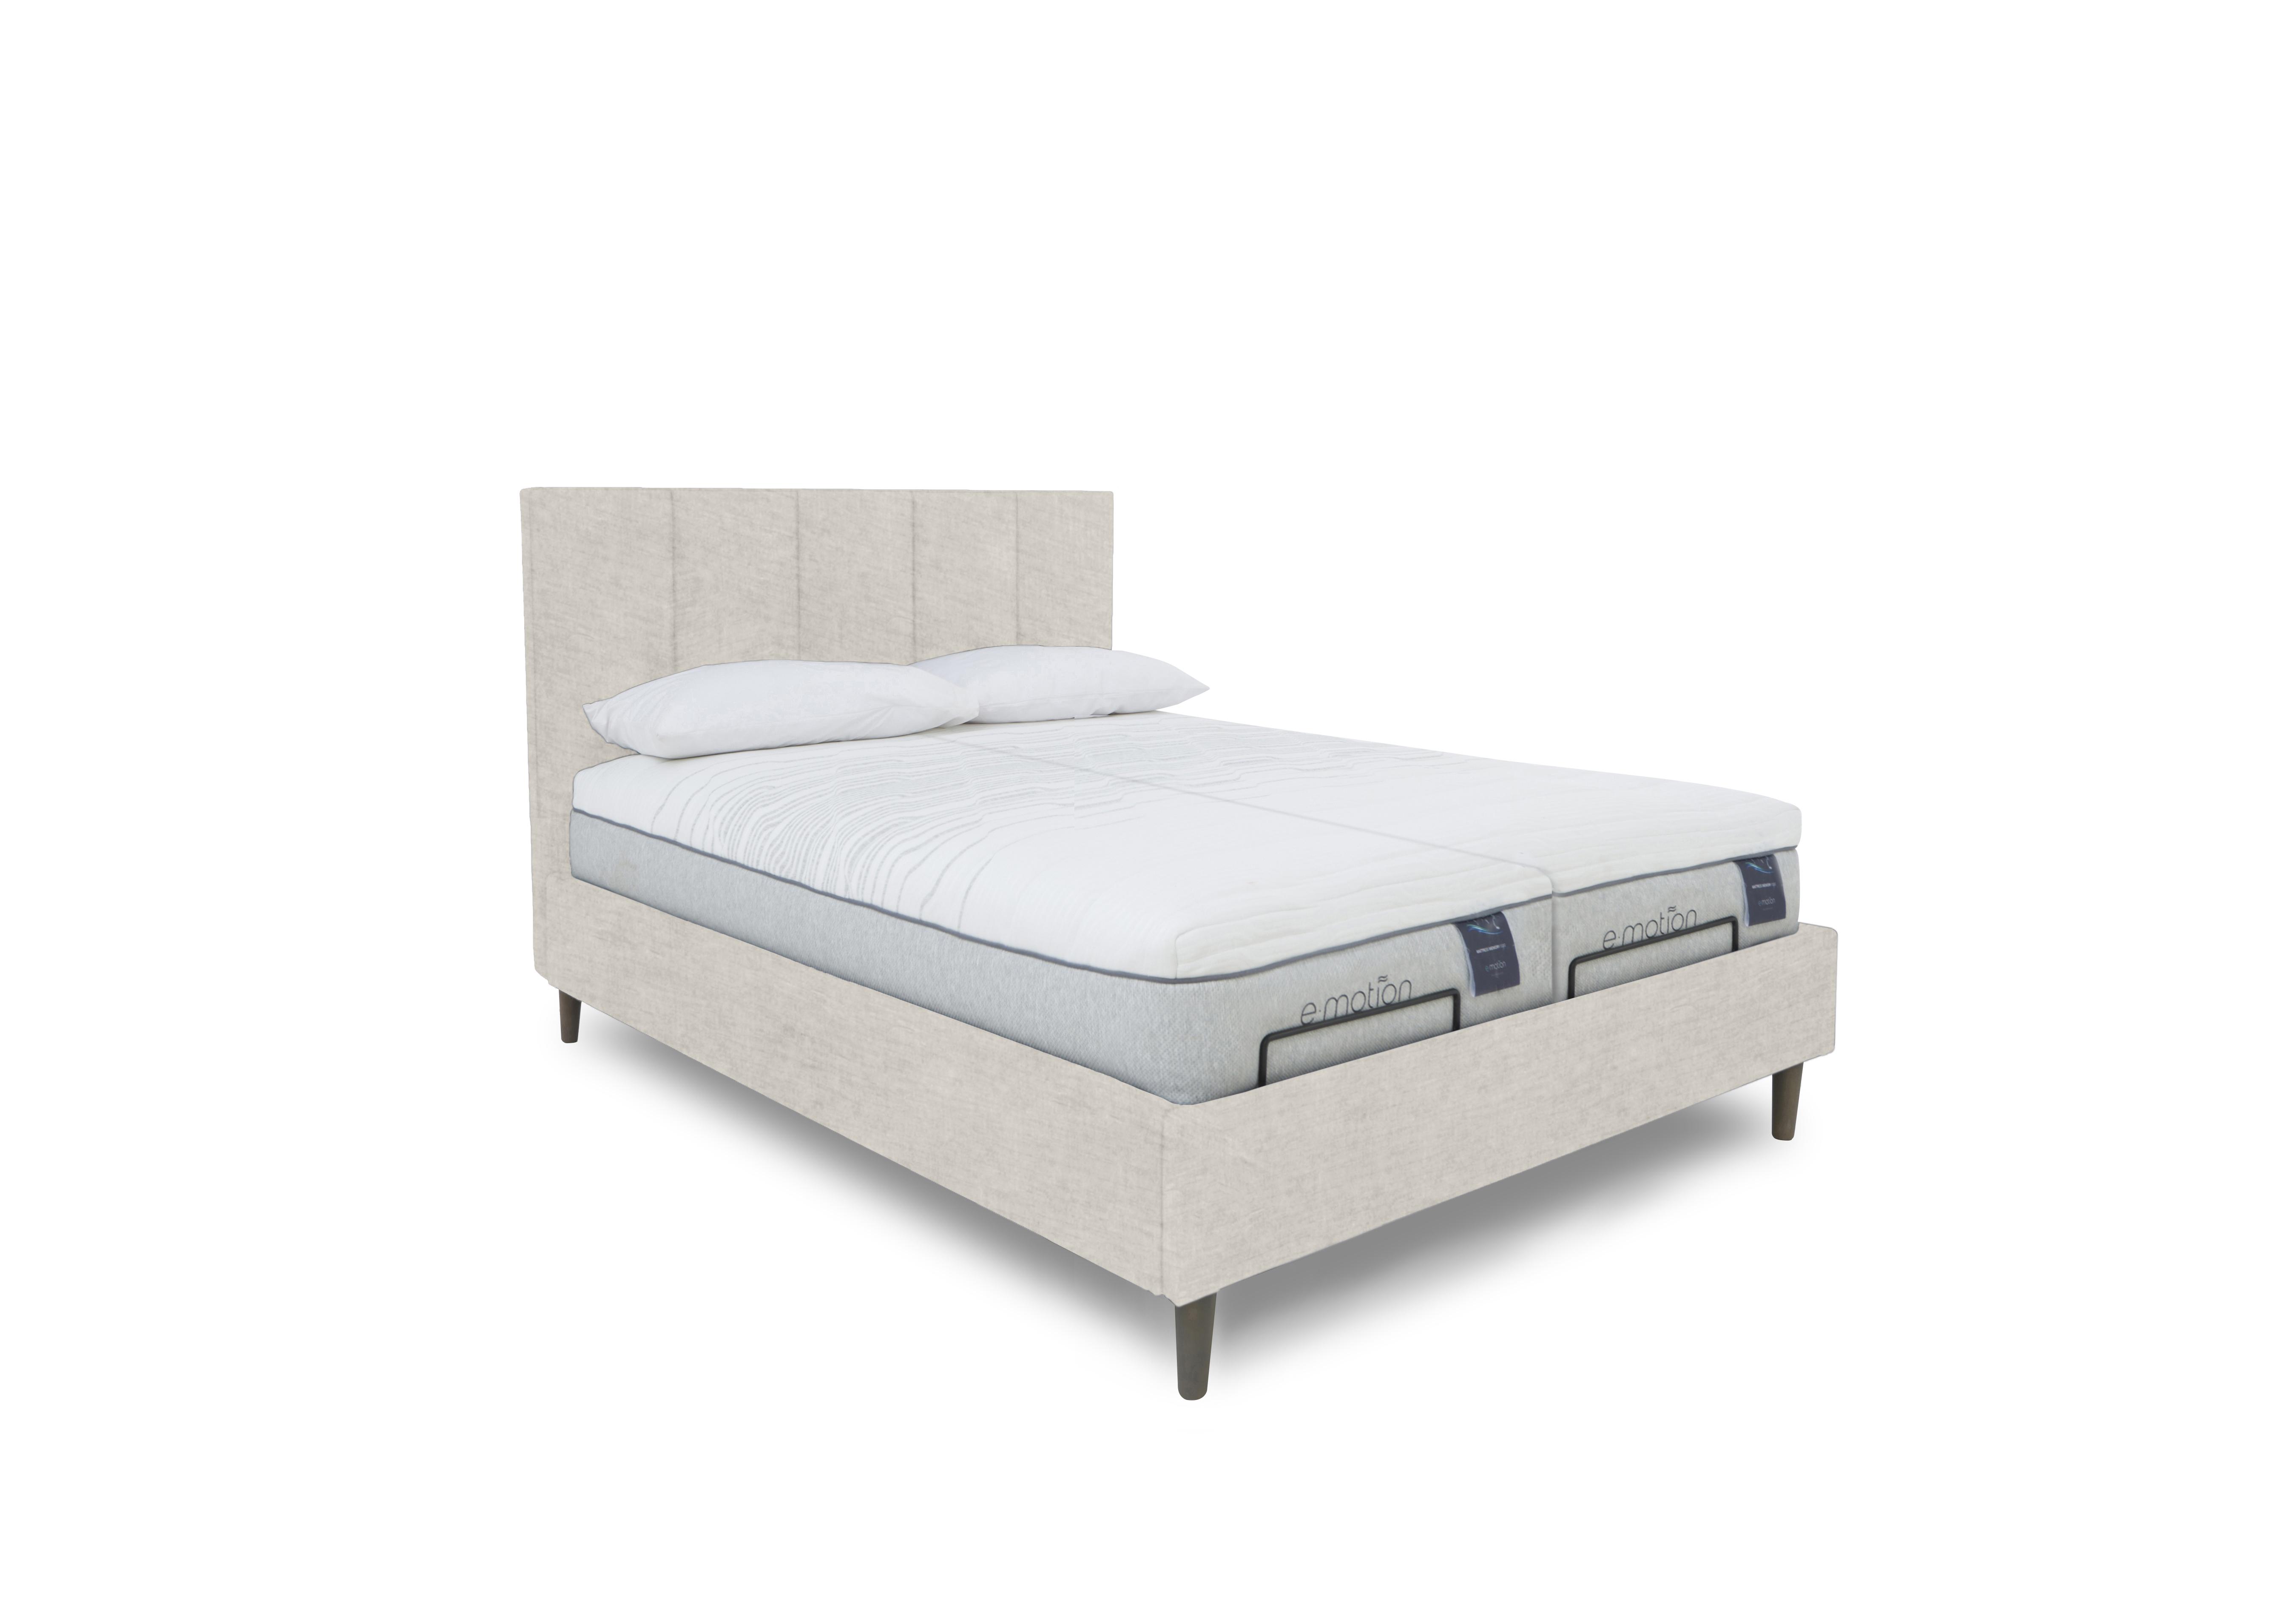 E-Motion Aiko Dual Adjustable Bed Frame with Massage Function in 901 Sandstone Pearl on Furniture Village